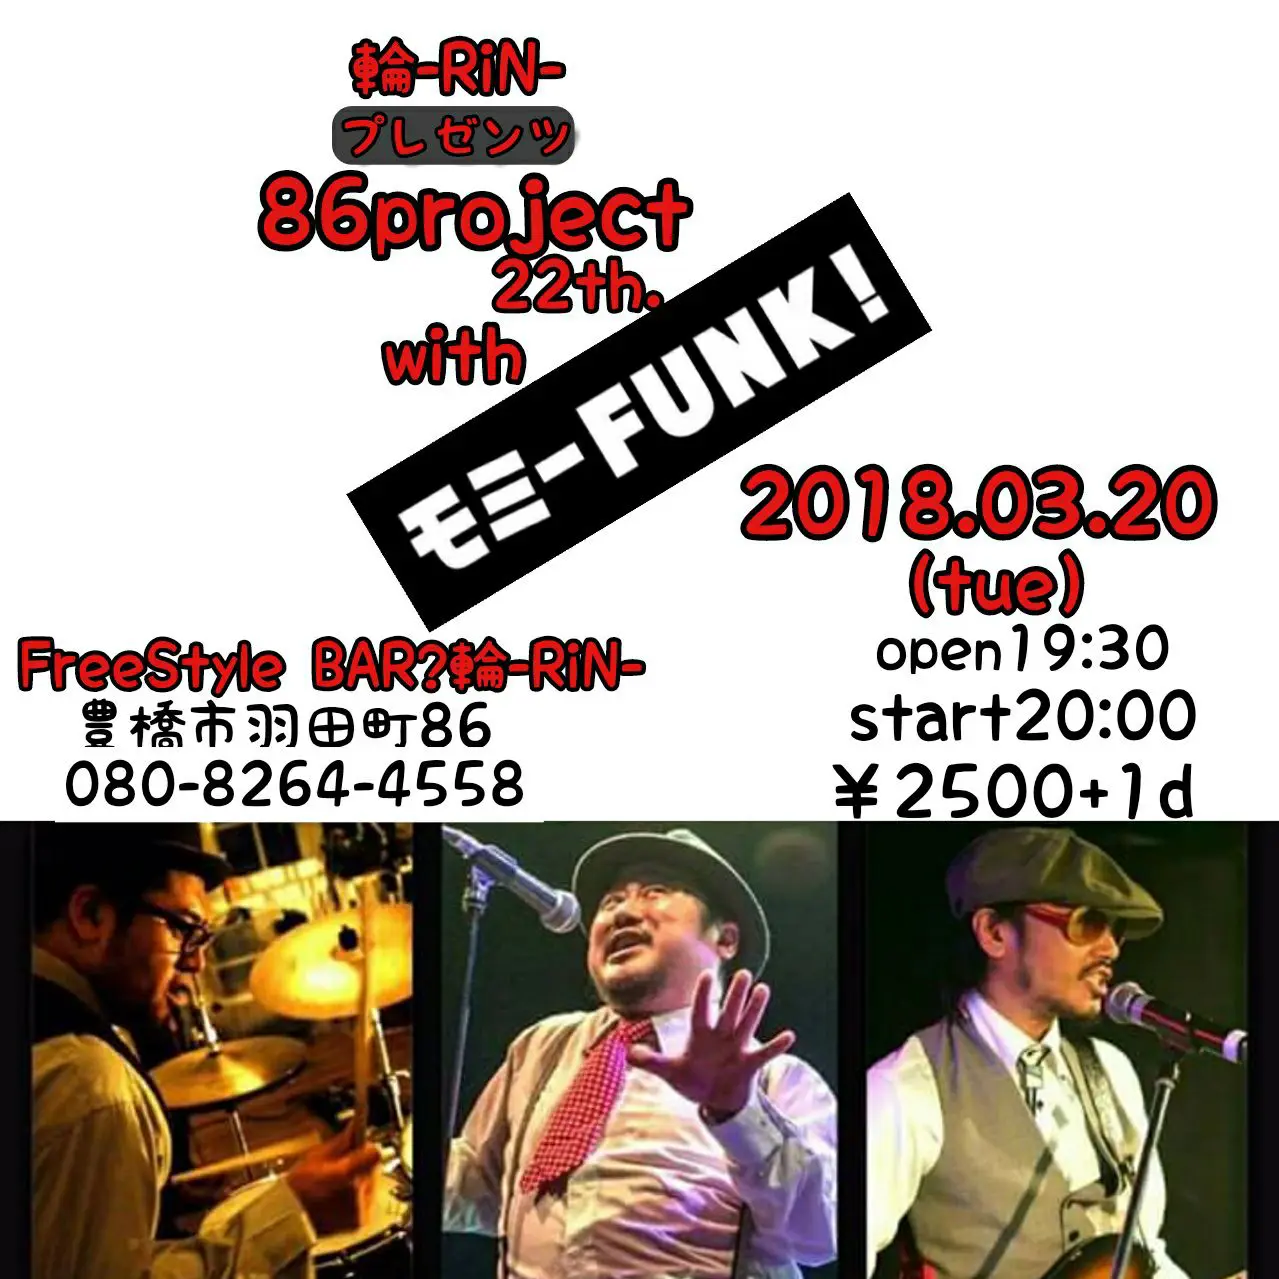 86project22th.withモミーFUNK！